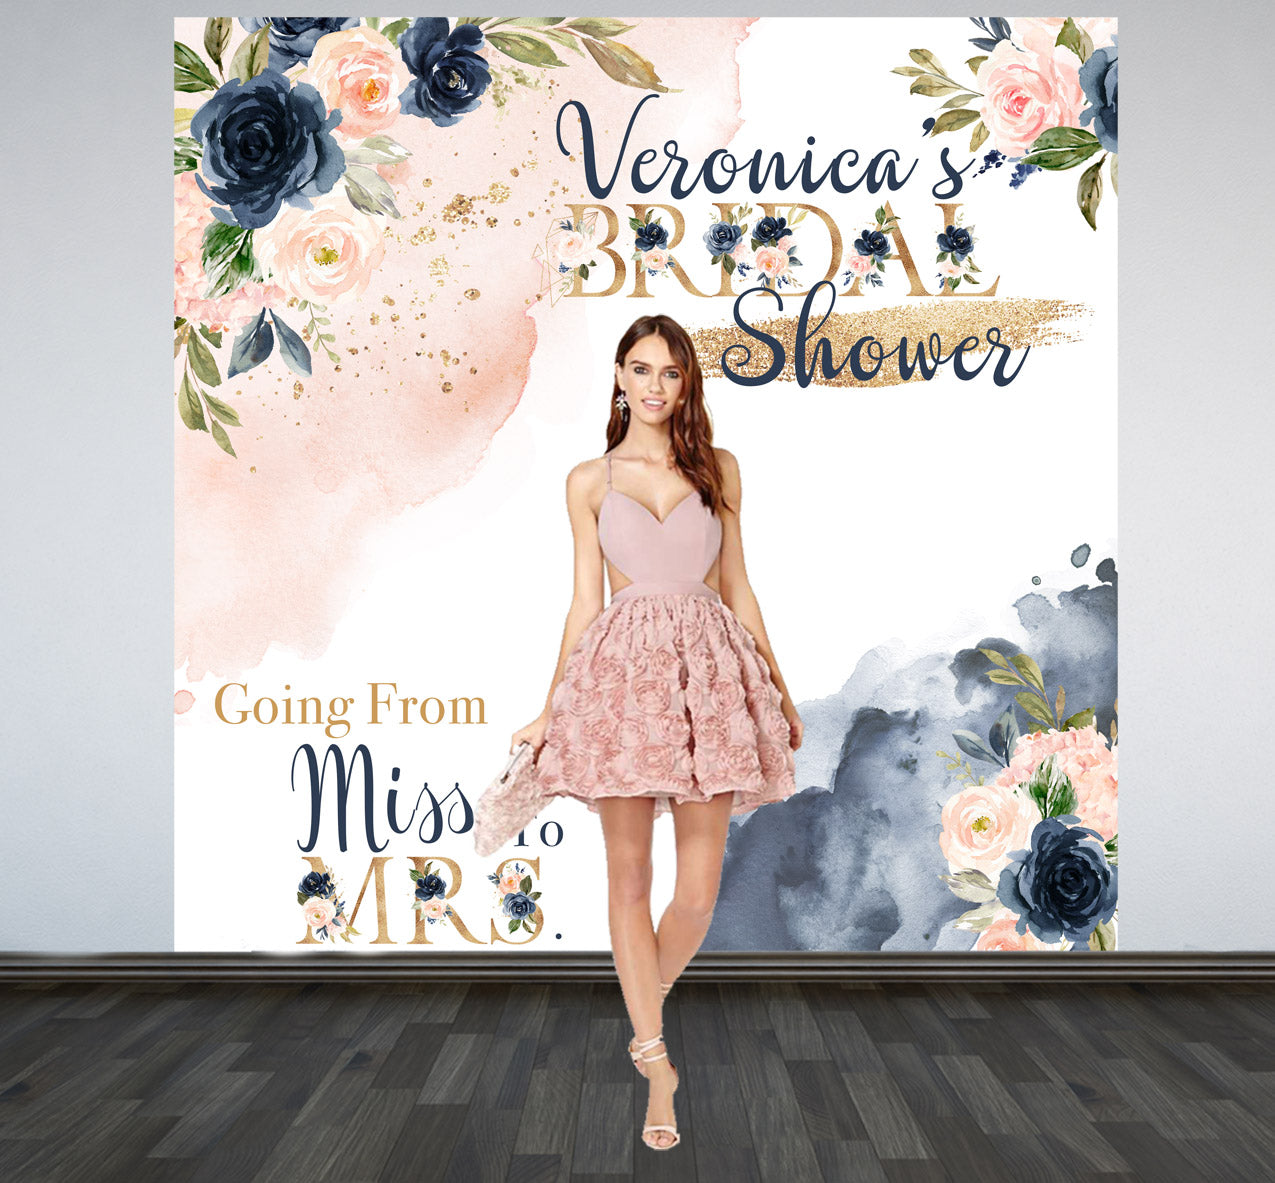 Ms. to Miss Navy Floral Photo Backdrop